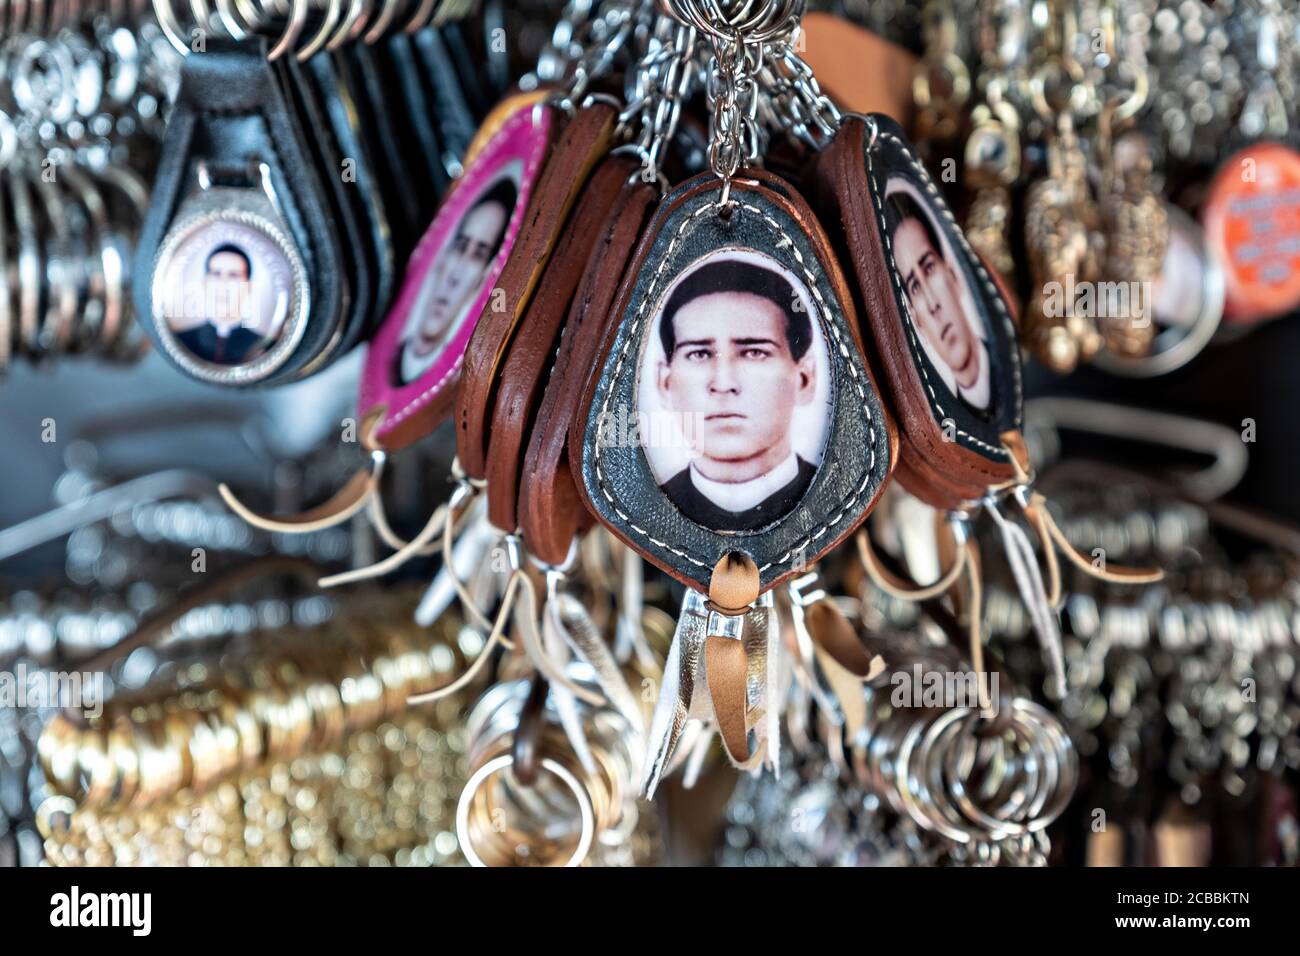 Souvenirs of Saint Toribio Romo at the Sanctuary Santa Ana de Guadalupe in Jalisco State, Mexico. Father Toribio was a Mexican Catholic priest and martyr who was killed during the anti-clerical persecutions of the Cristero War. Stock Photo